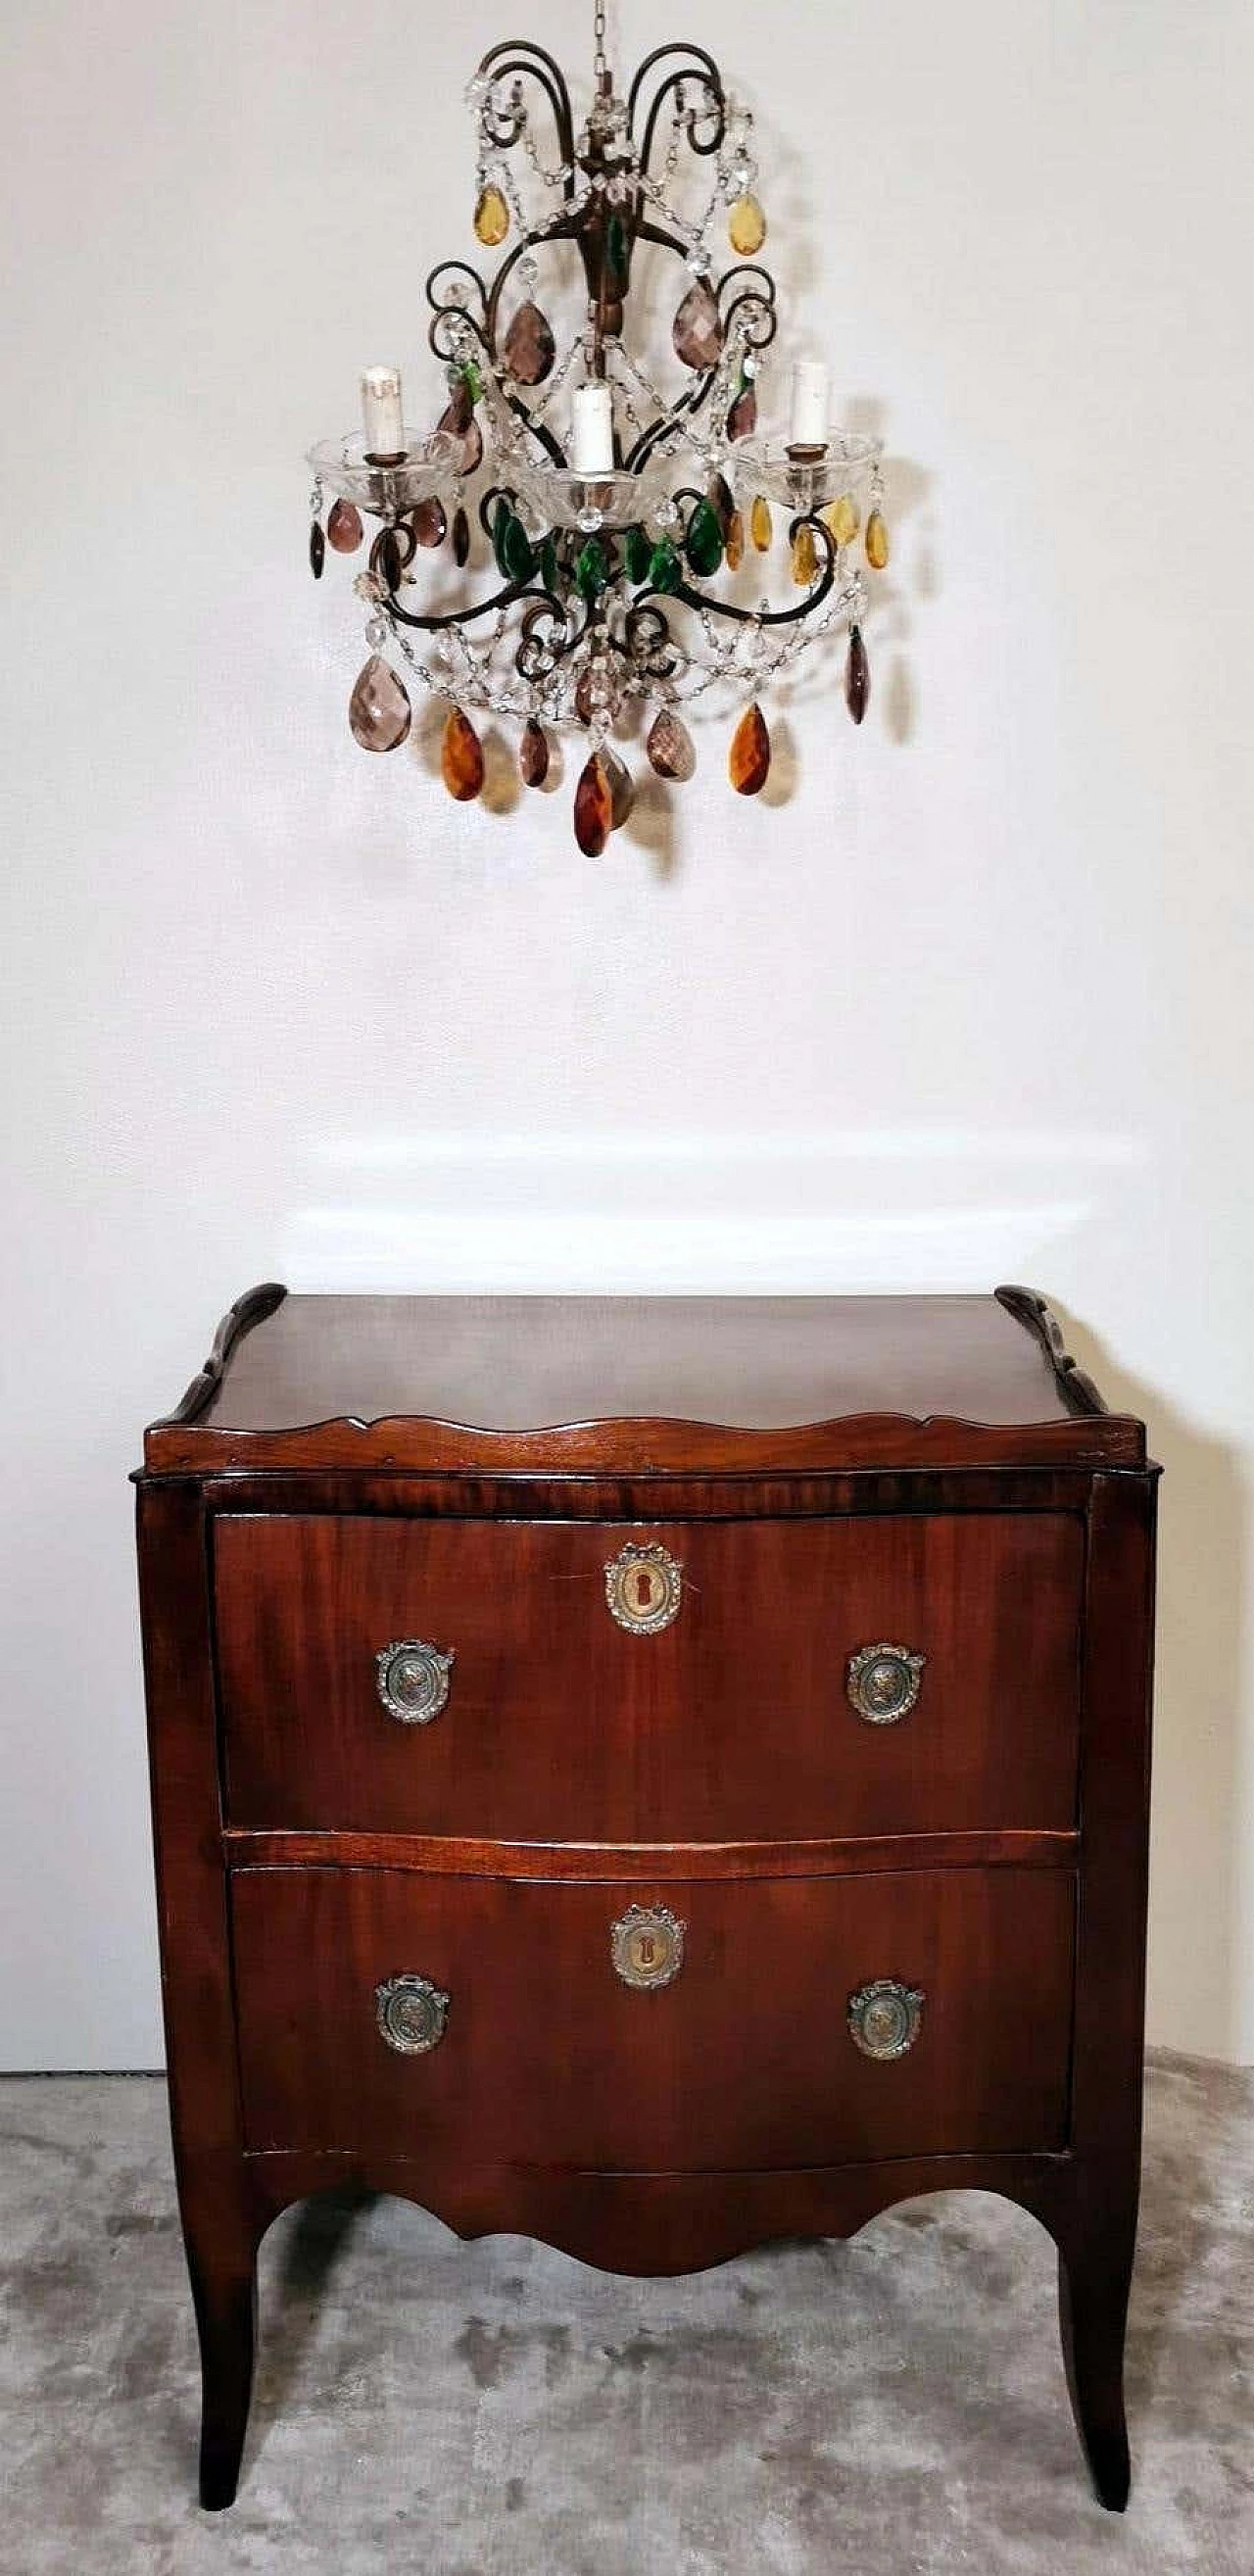 Neoclassical style chest of drawers in mahogany with bronze decorations, 18th century 1332981